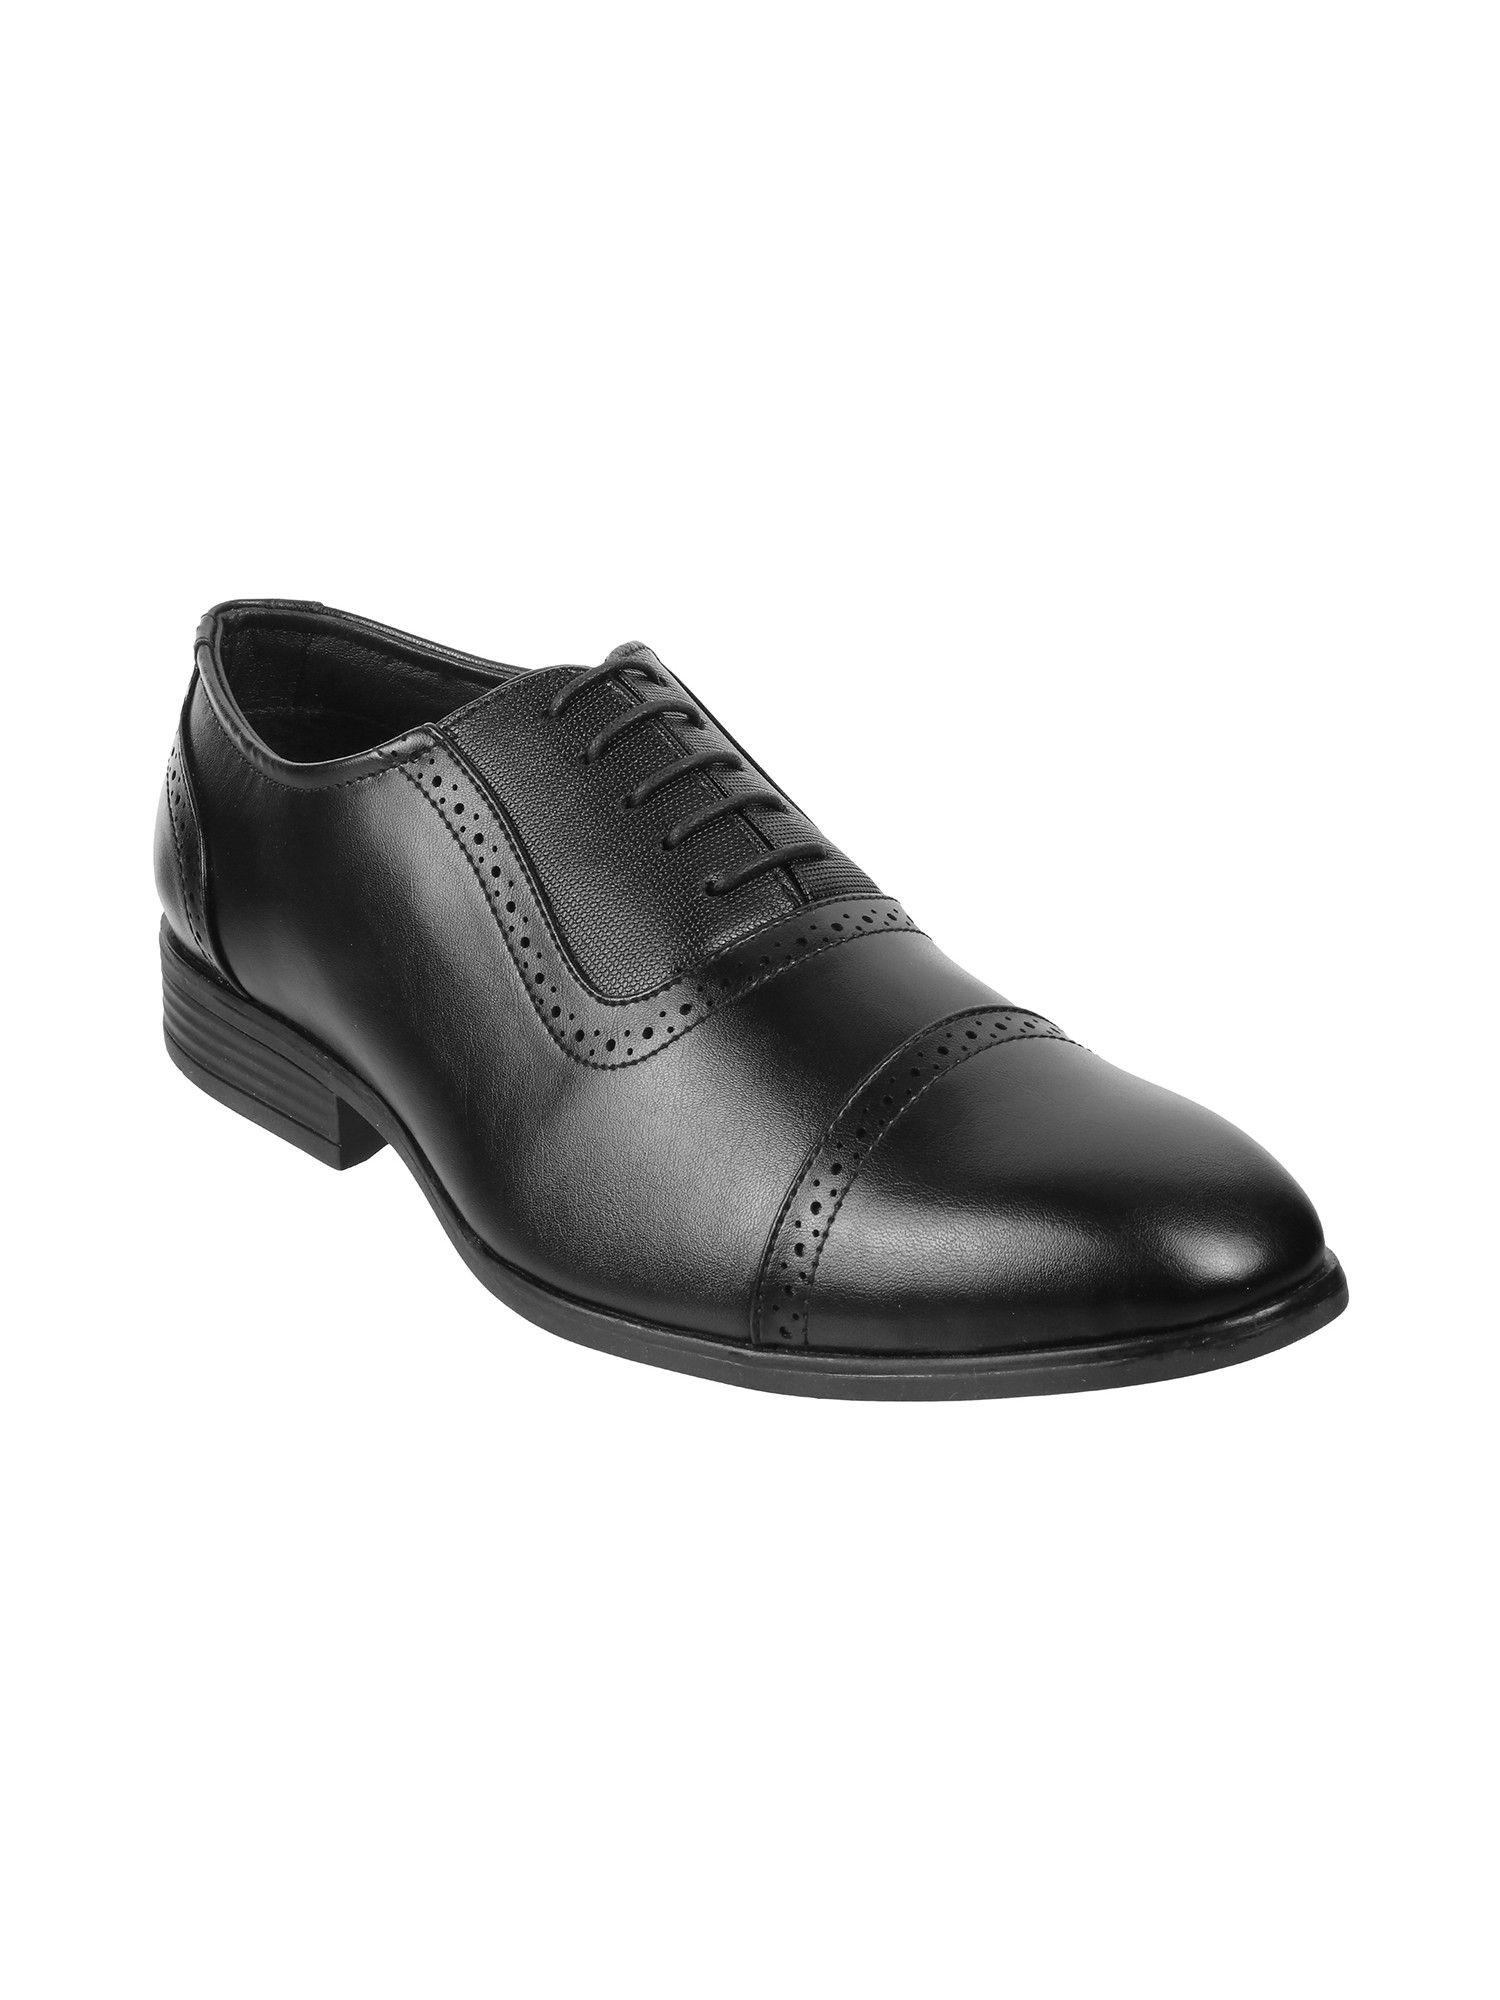 black solid leather oxfords